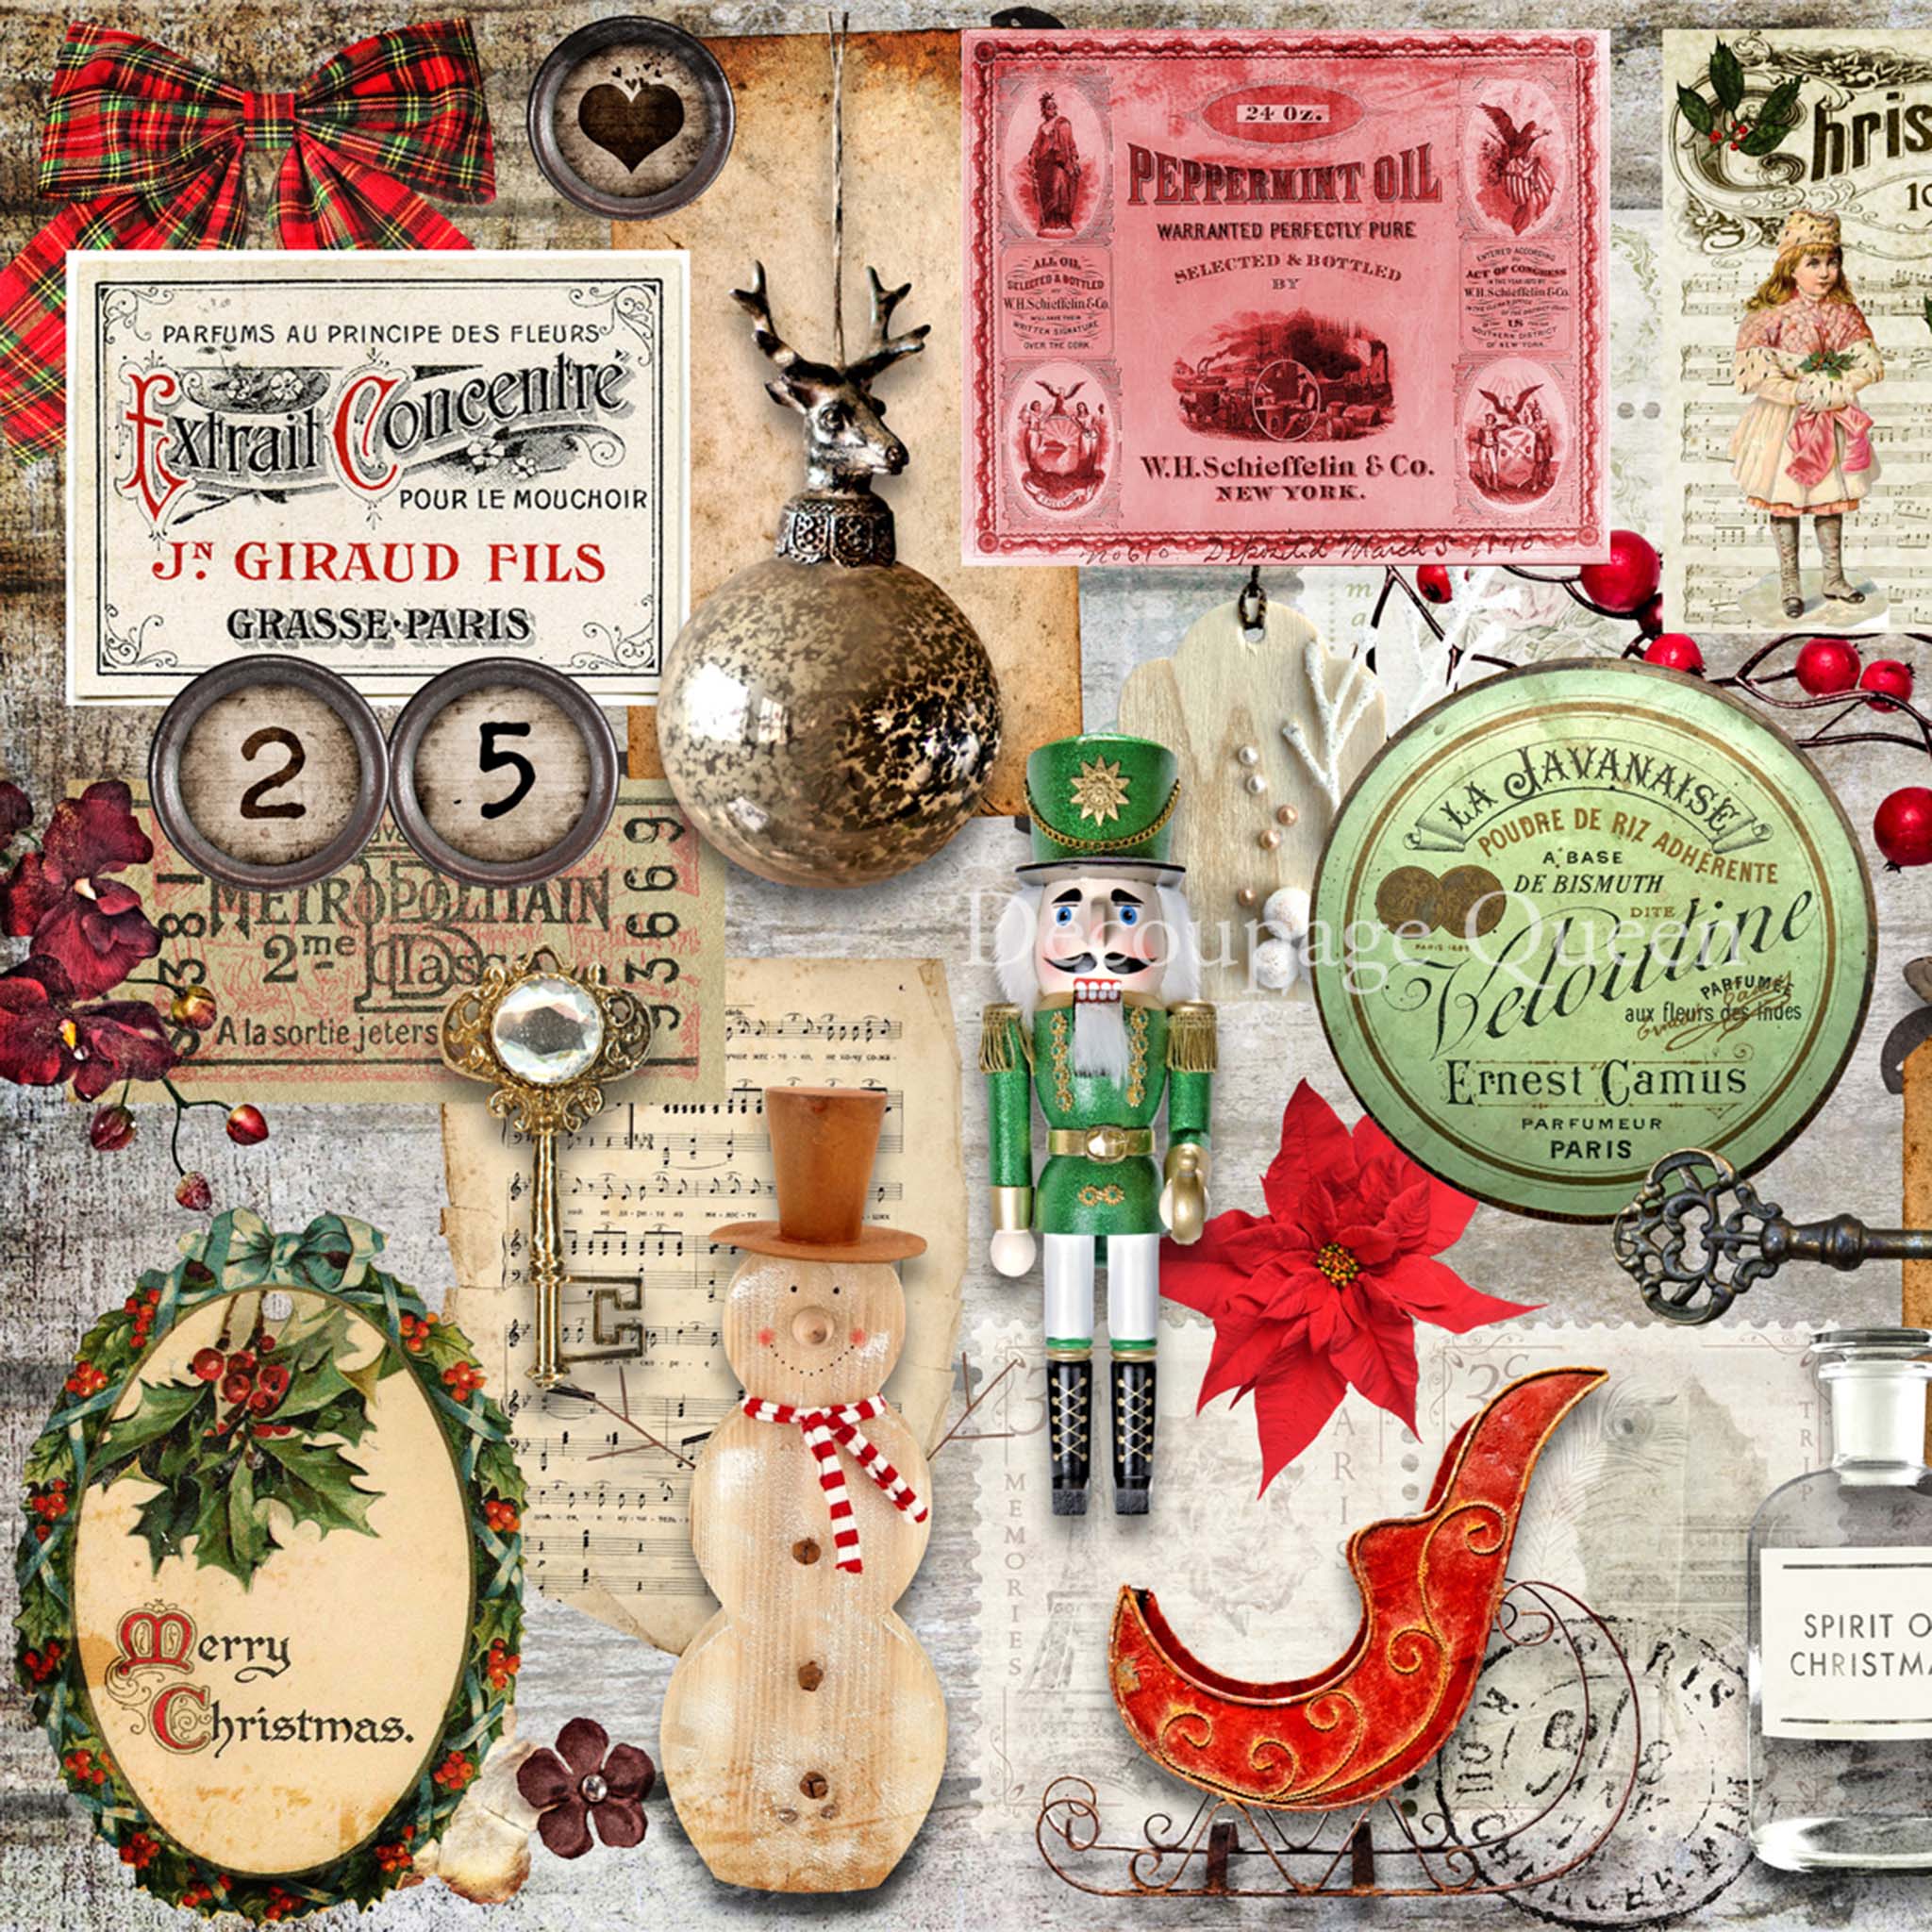 A3 rice paper that features a collage of vintage Christmas decorations, ornaments, and sheet music.